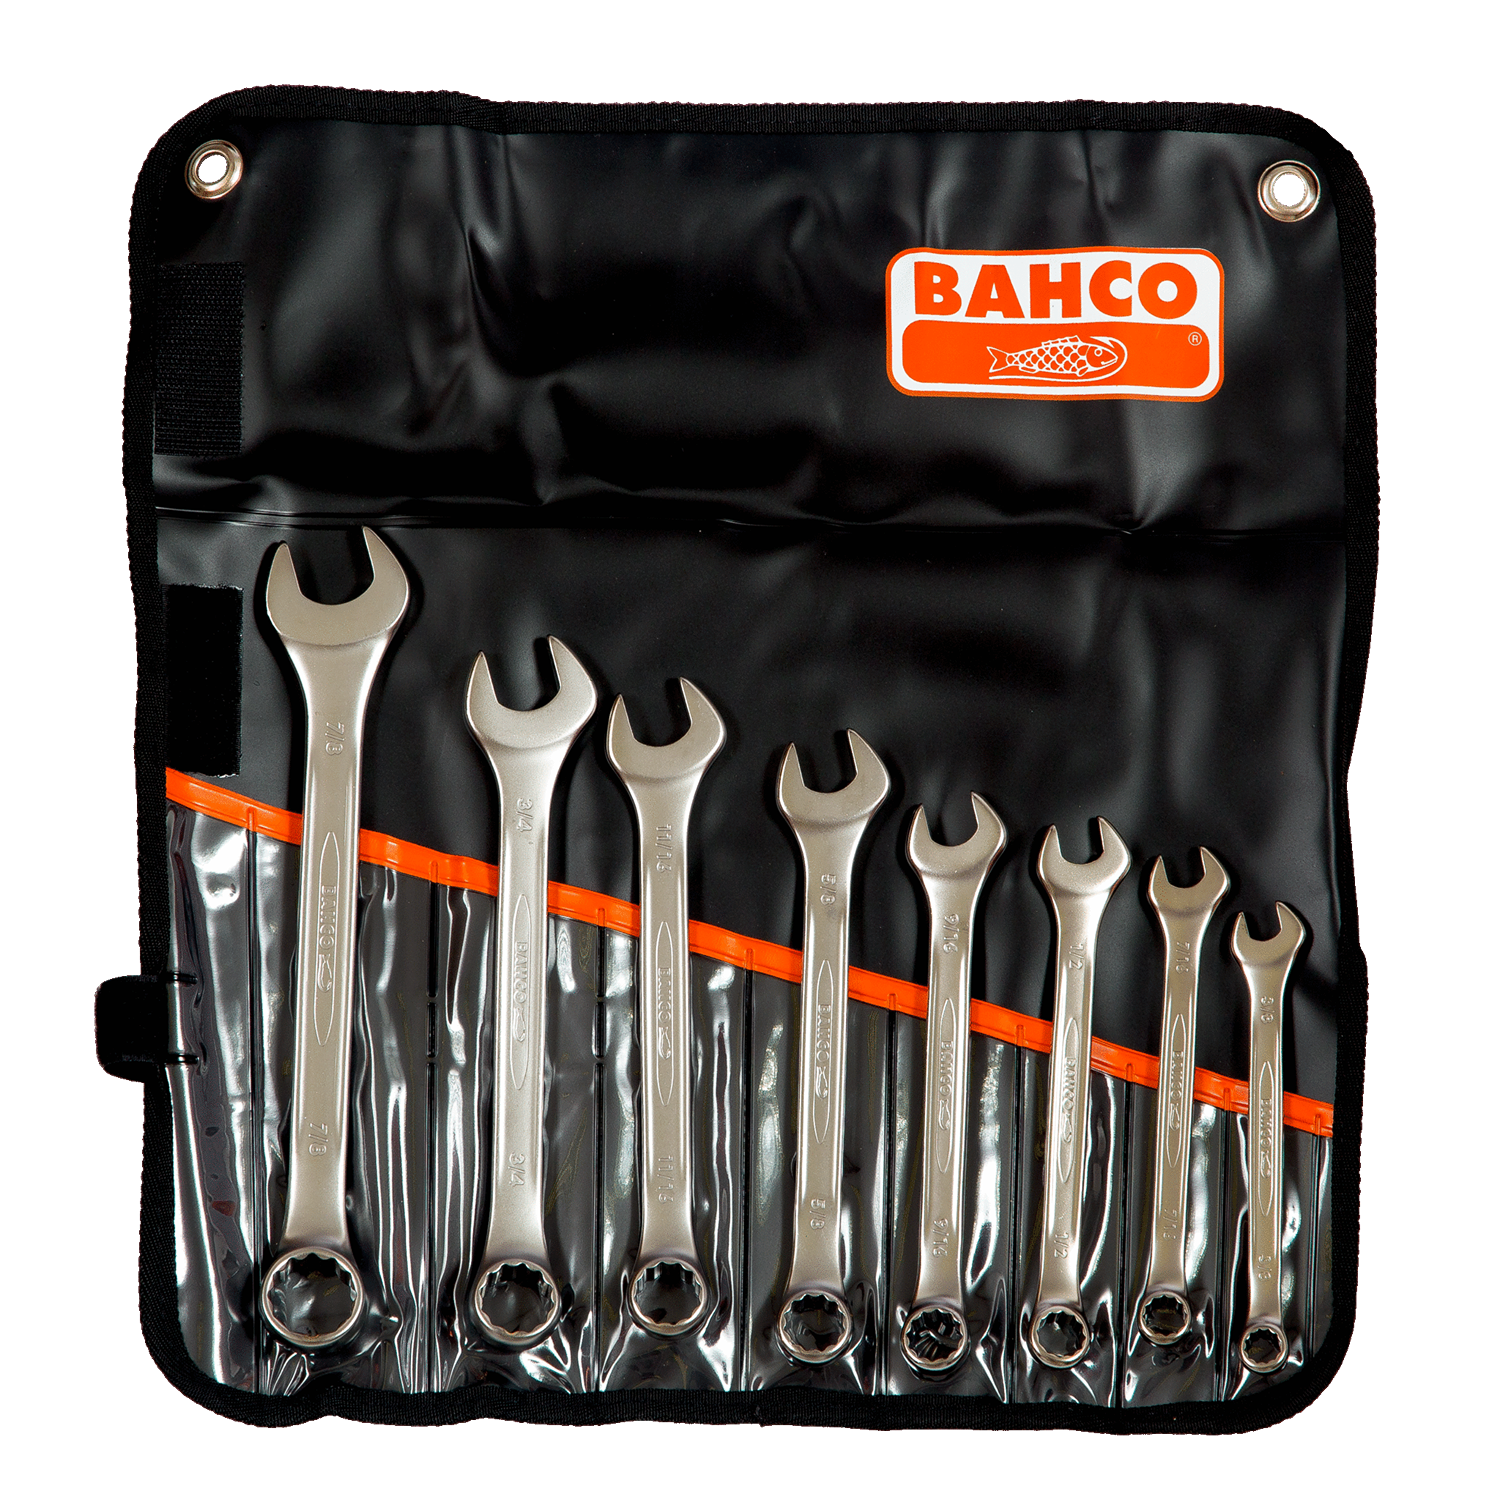 BAHCO 111Z/ Imperial Flat Combination Wrench Set - 8 Pcs Pouch - Premium Flat Combination Wrench Set from BAHCO - Shop now at Yew Aik.